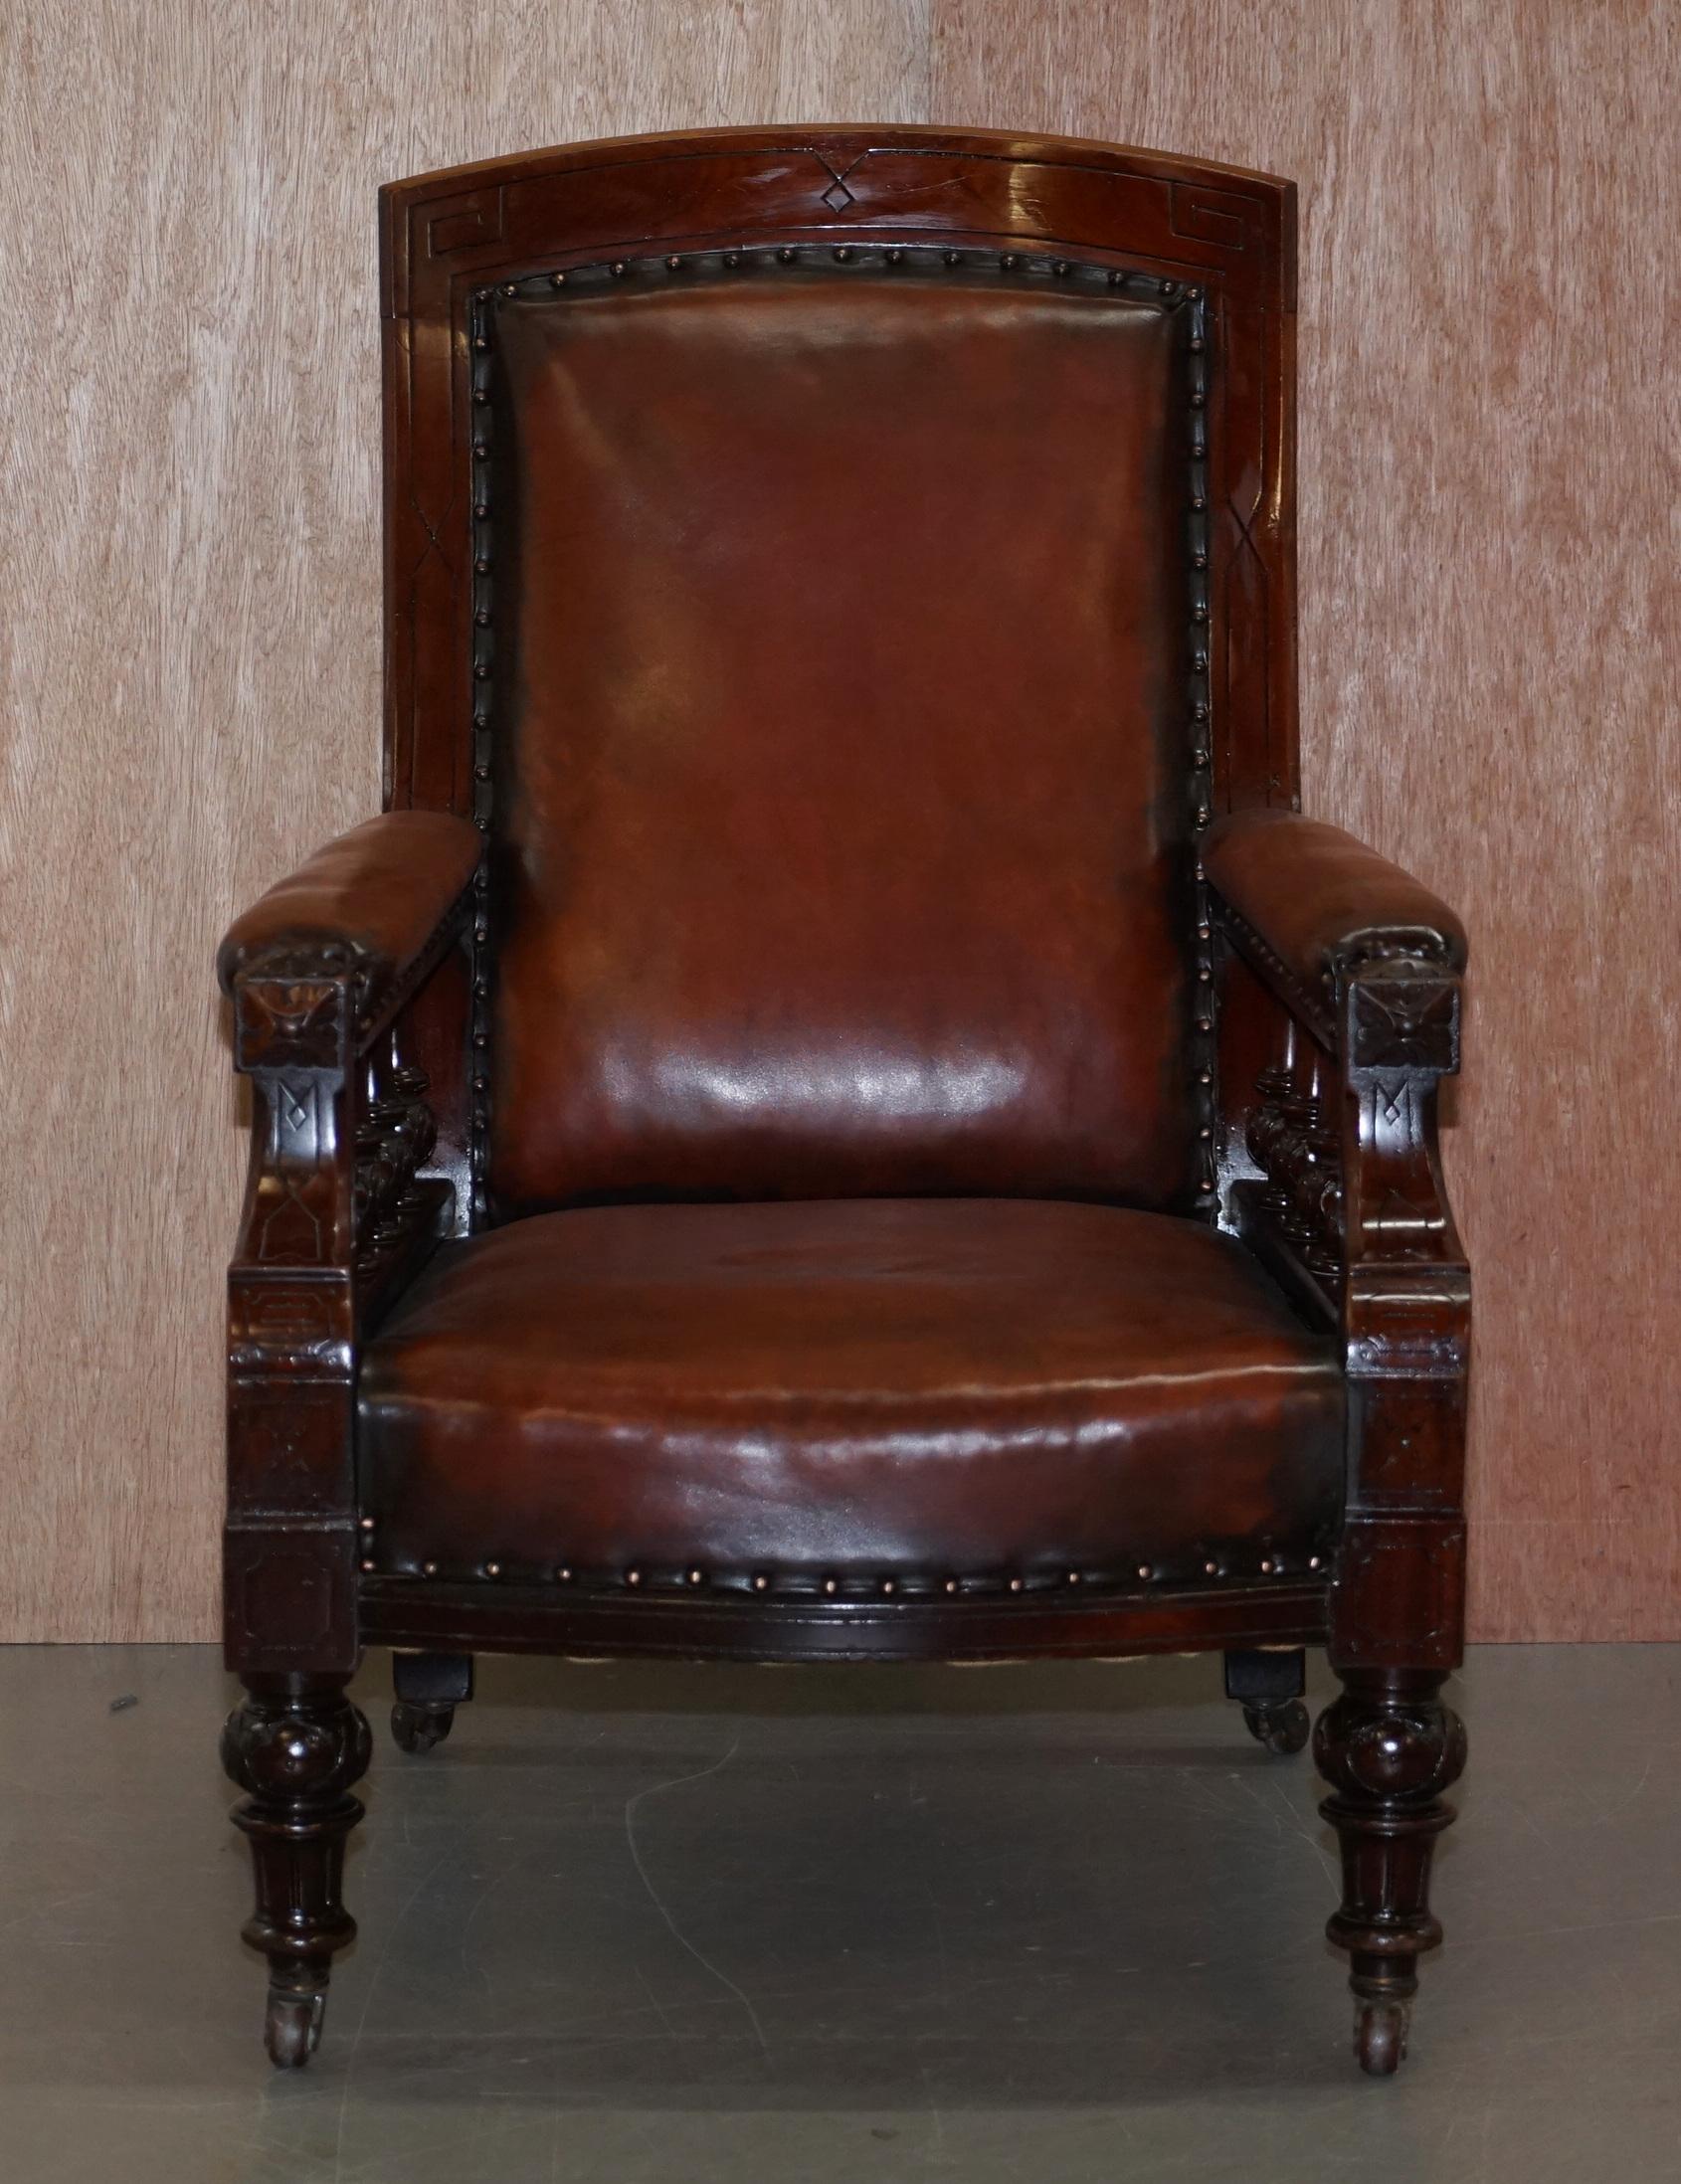 Wimbledon-Furniture

Wimbledon-Furniture is delighted to offer for sale this lovely fully restored early Victorian mahogany carved library reading armchair with hand dyed brown leather upholstery 

Please note the delivery fee listed is just a